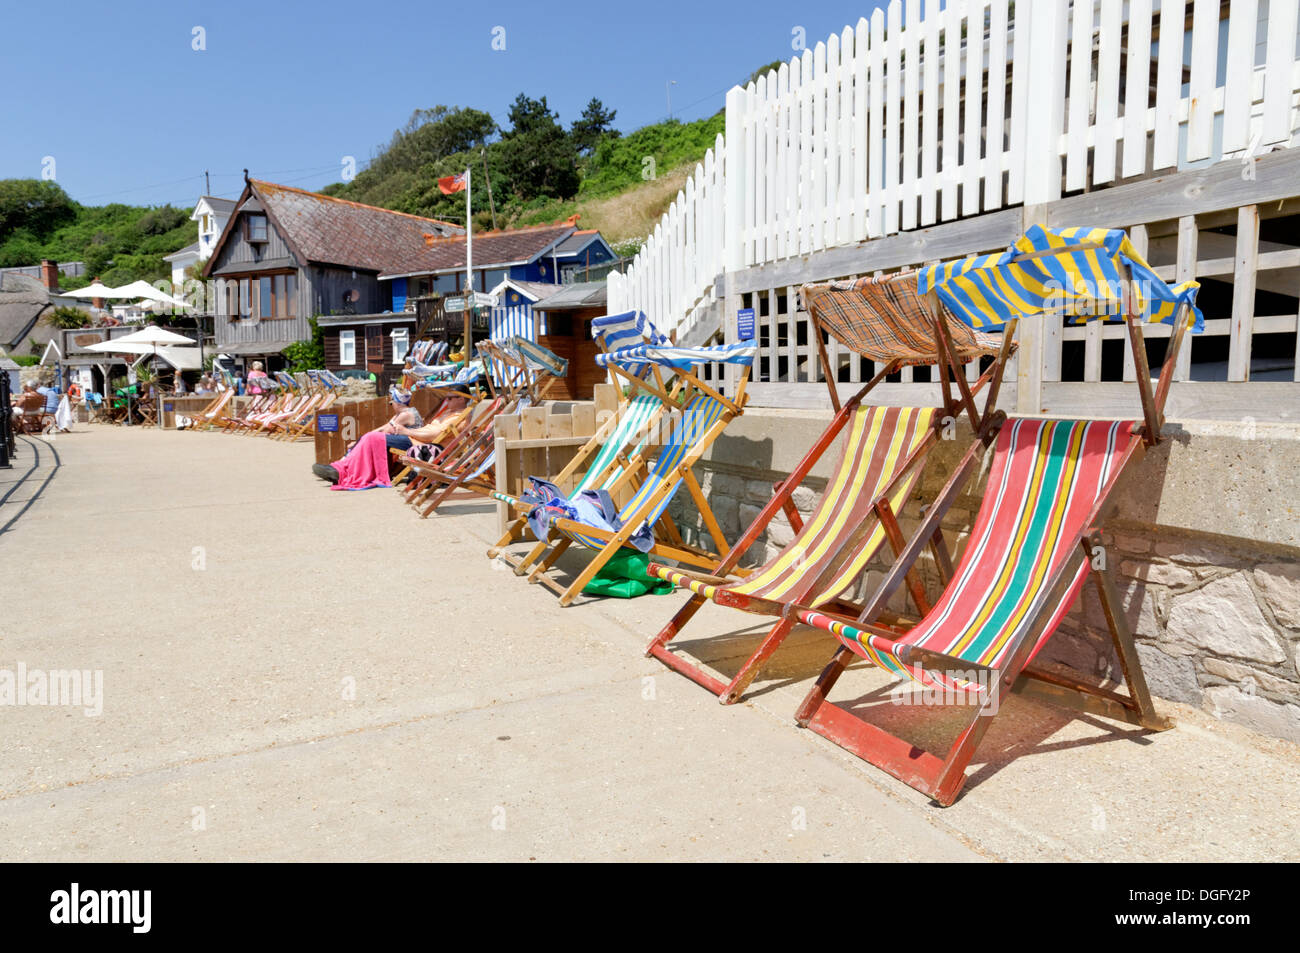 Deckchairs, Steephill Cove,Whitwell, Ventnor, Isle of Wight, England, UK. GB. Stock Photo